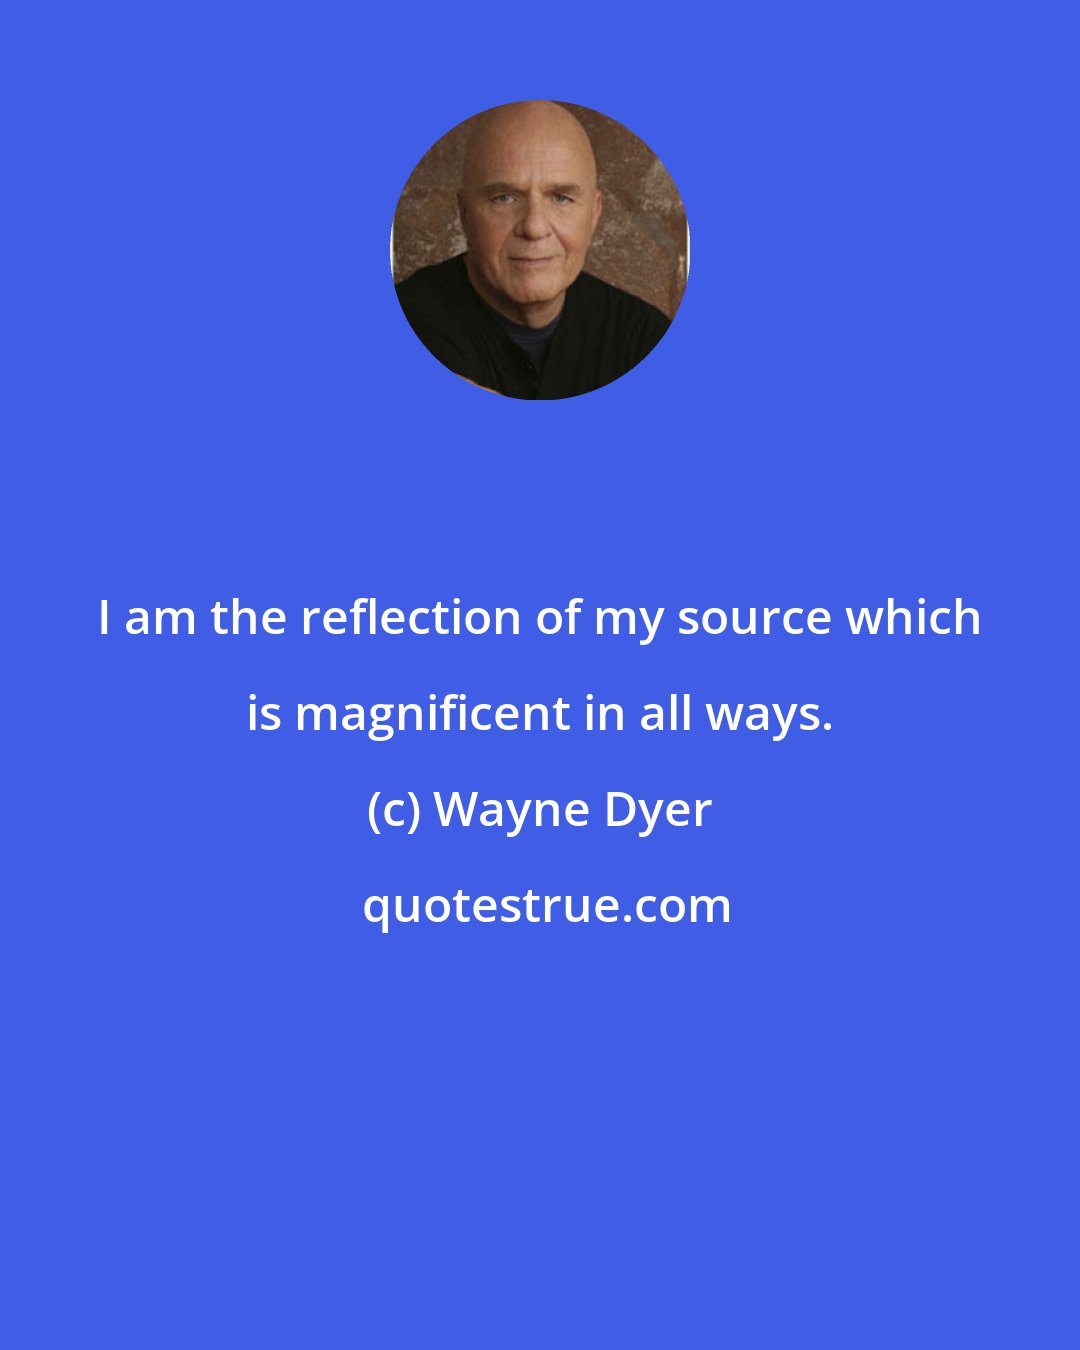 Wayne Dyer: I am the reflection of my source which is magnificent in all ways.